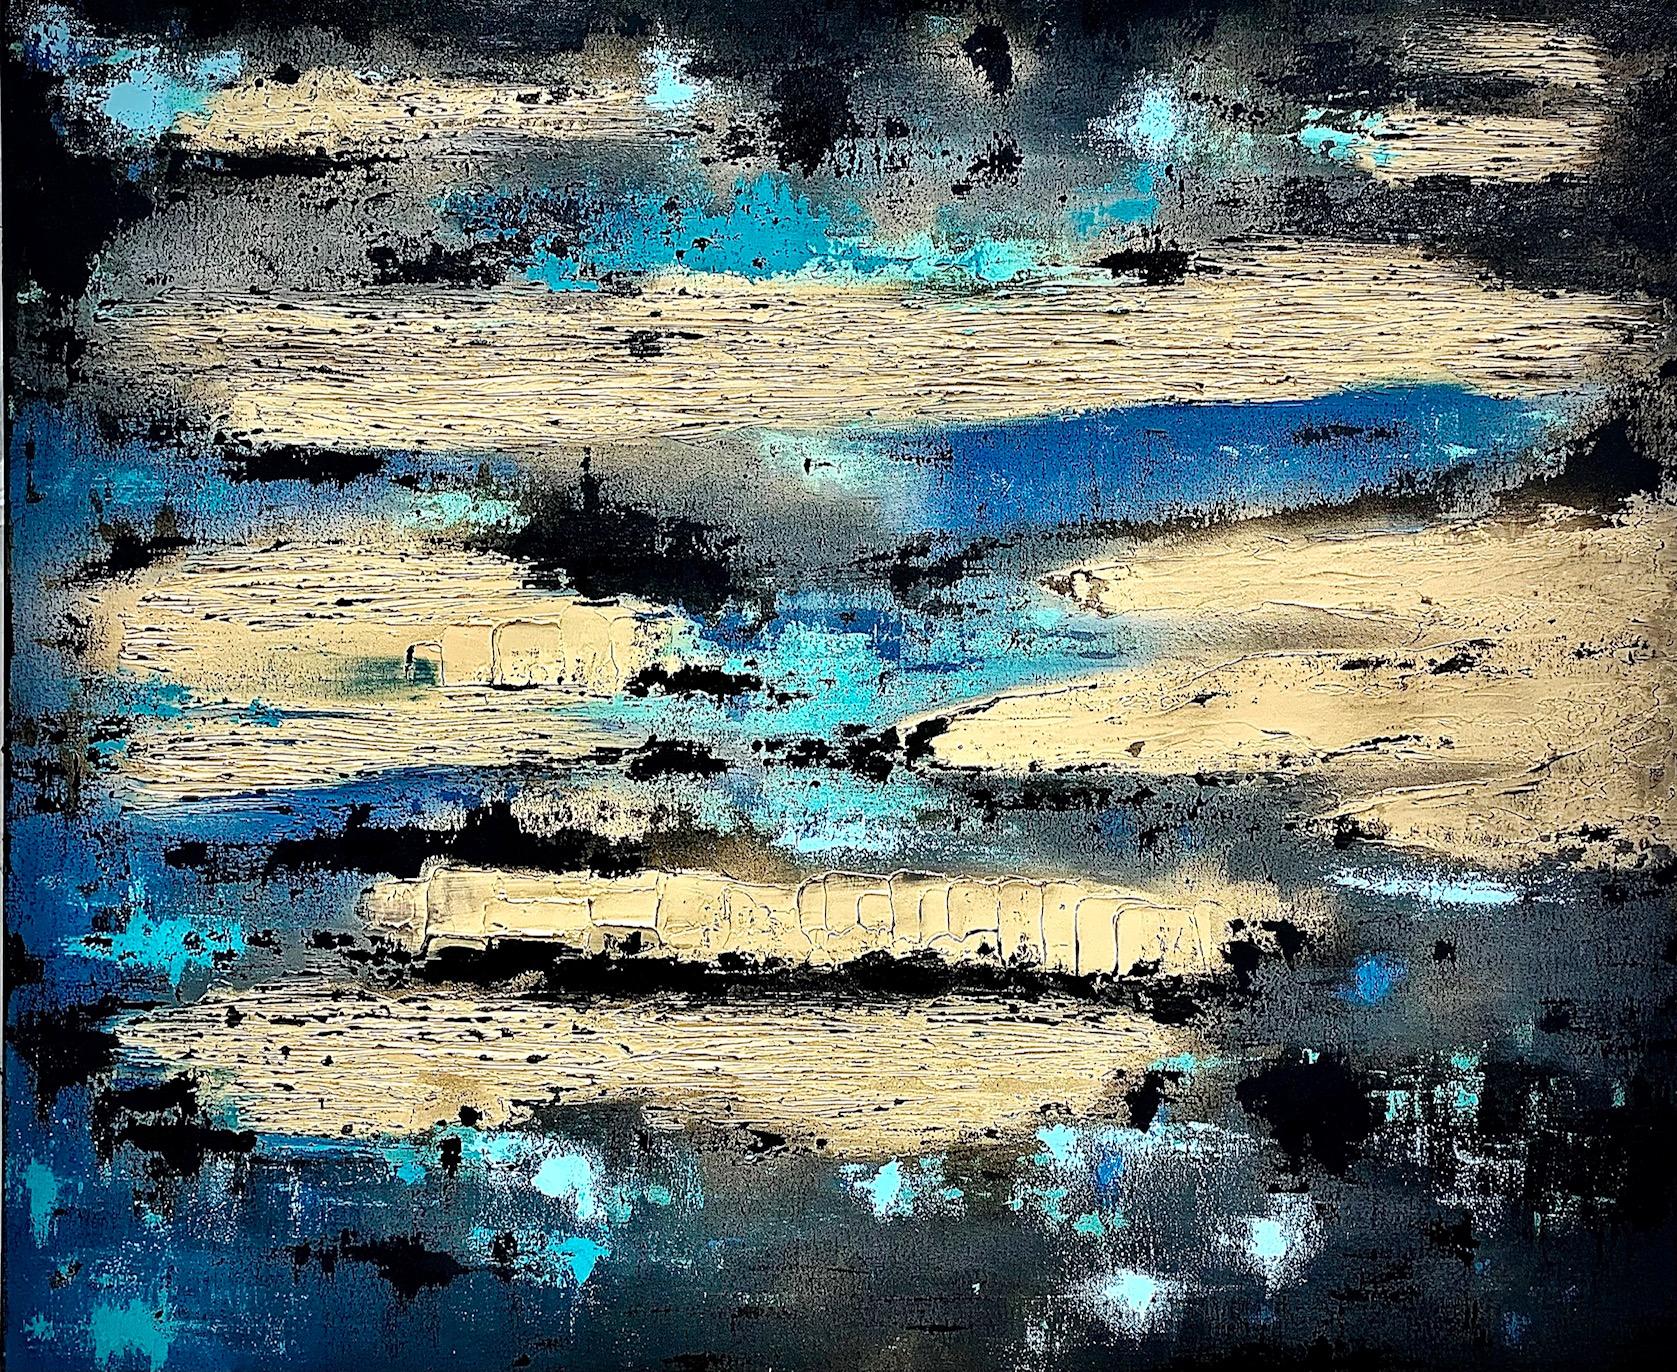 Sarah Berger Landscape Painting - TAKE ME TO THE OCEAN III, Opulent Statement Artwork, Dramatic Painting, Gold Art